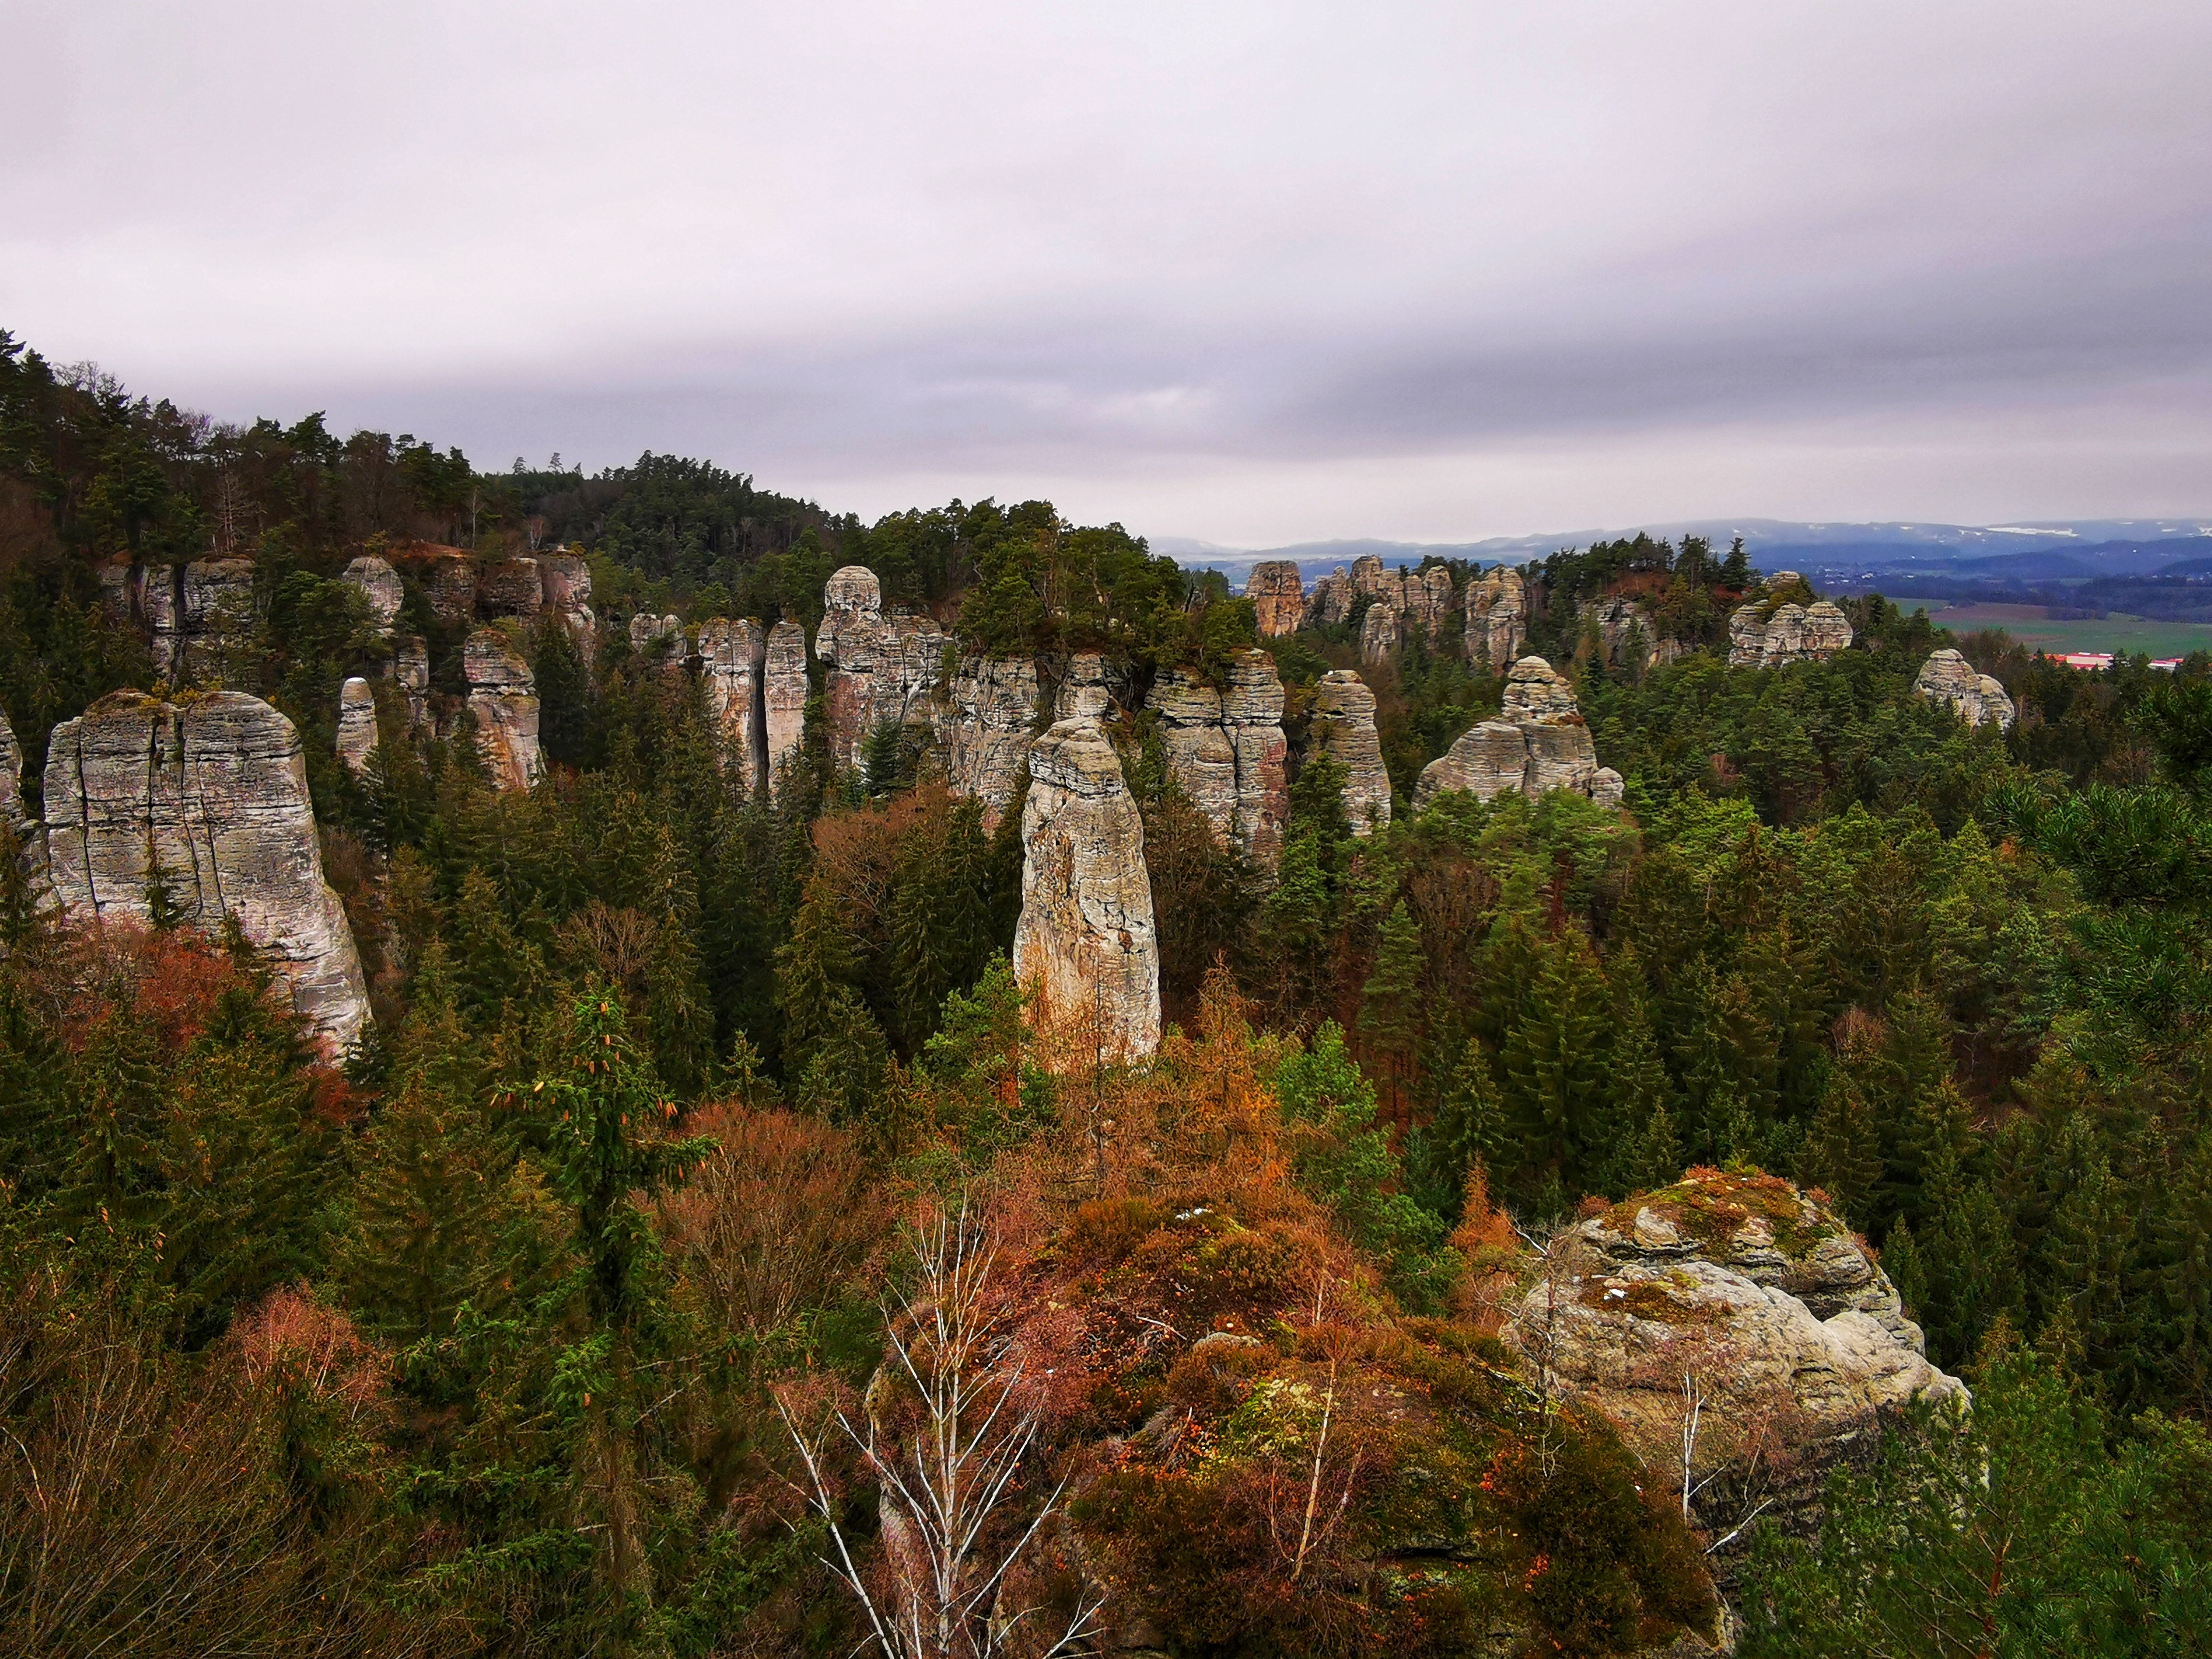 One of the most recognizable elements of Bohemian Paradise is the sandstone rock.